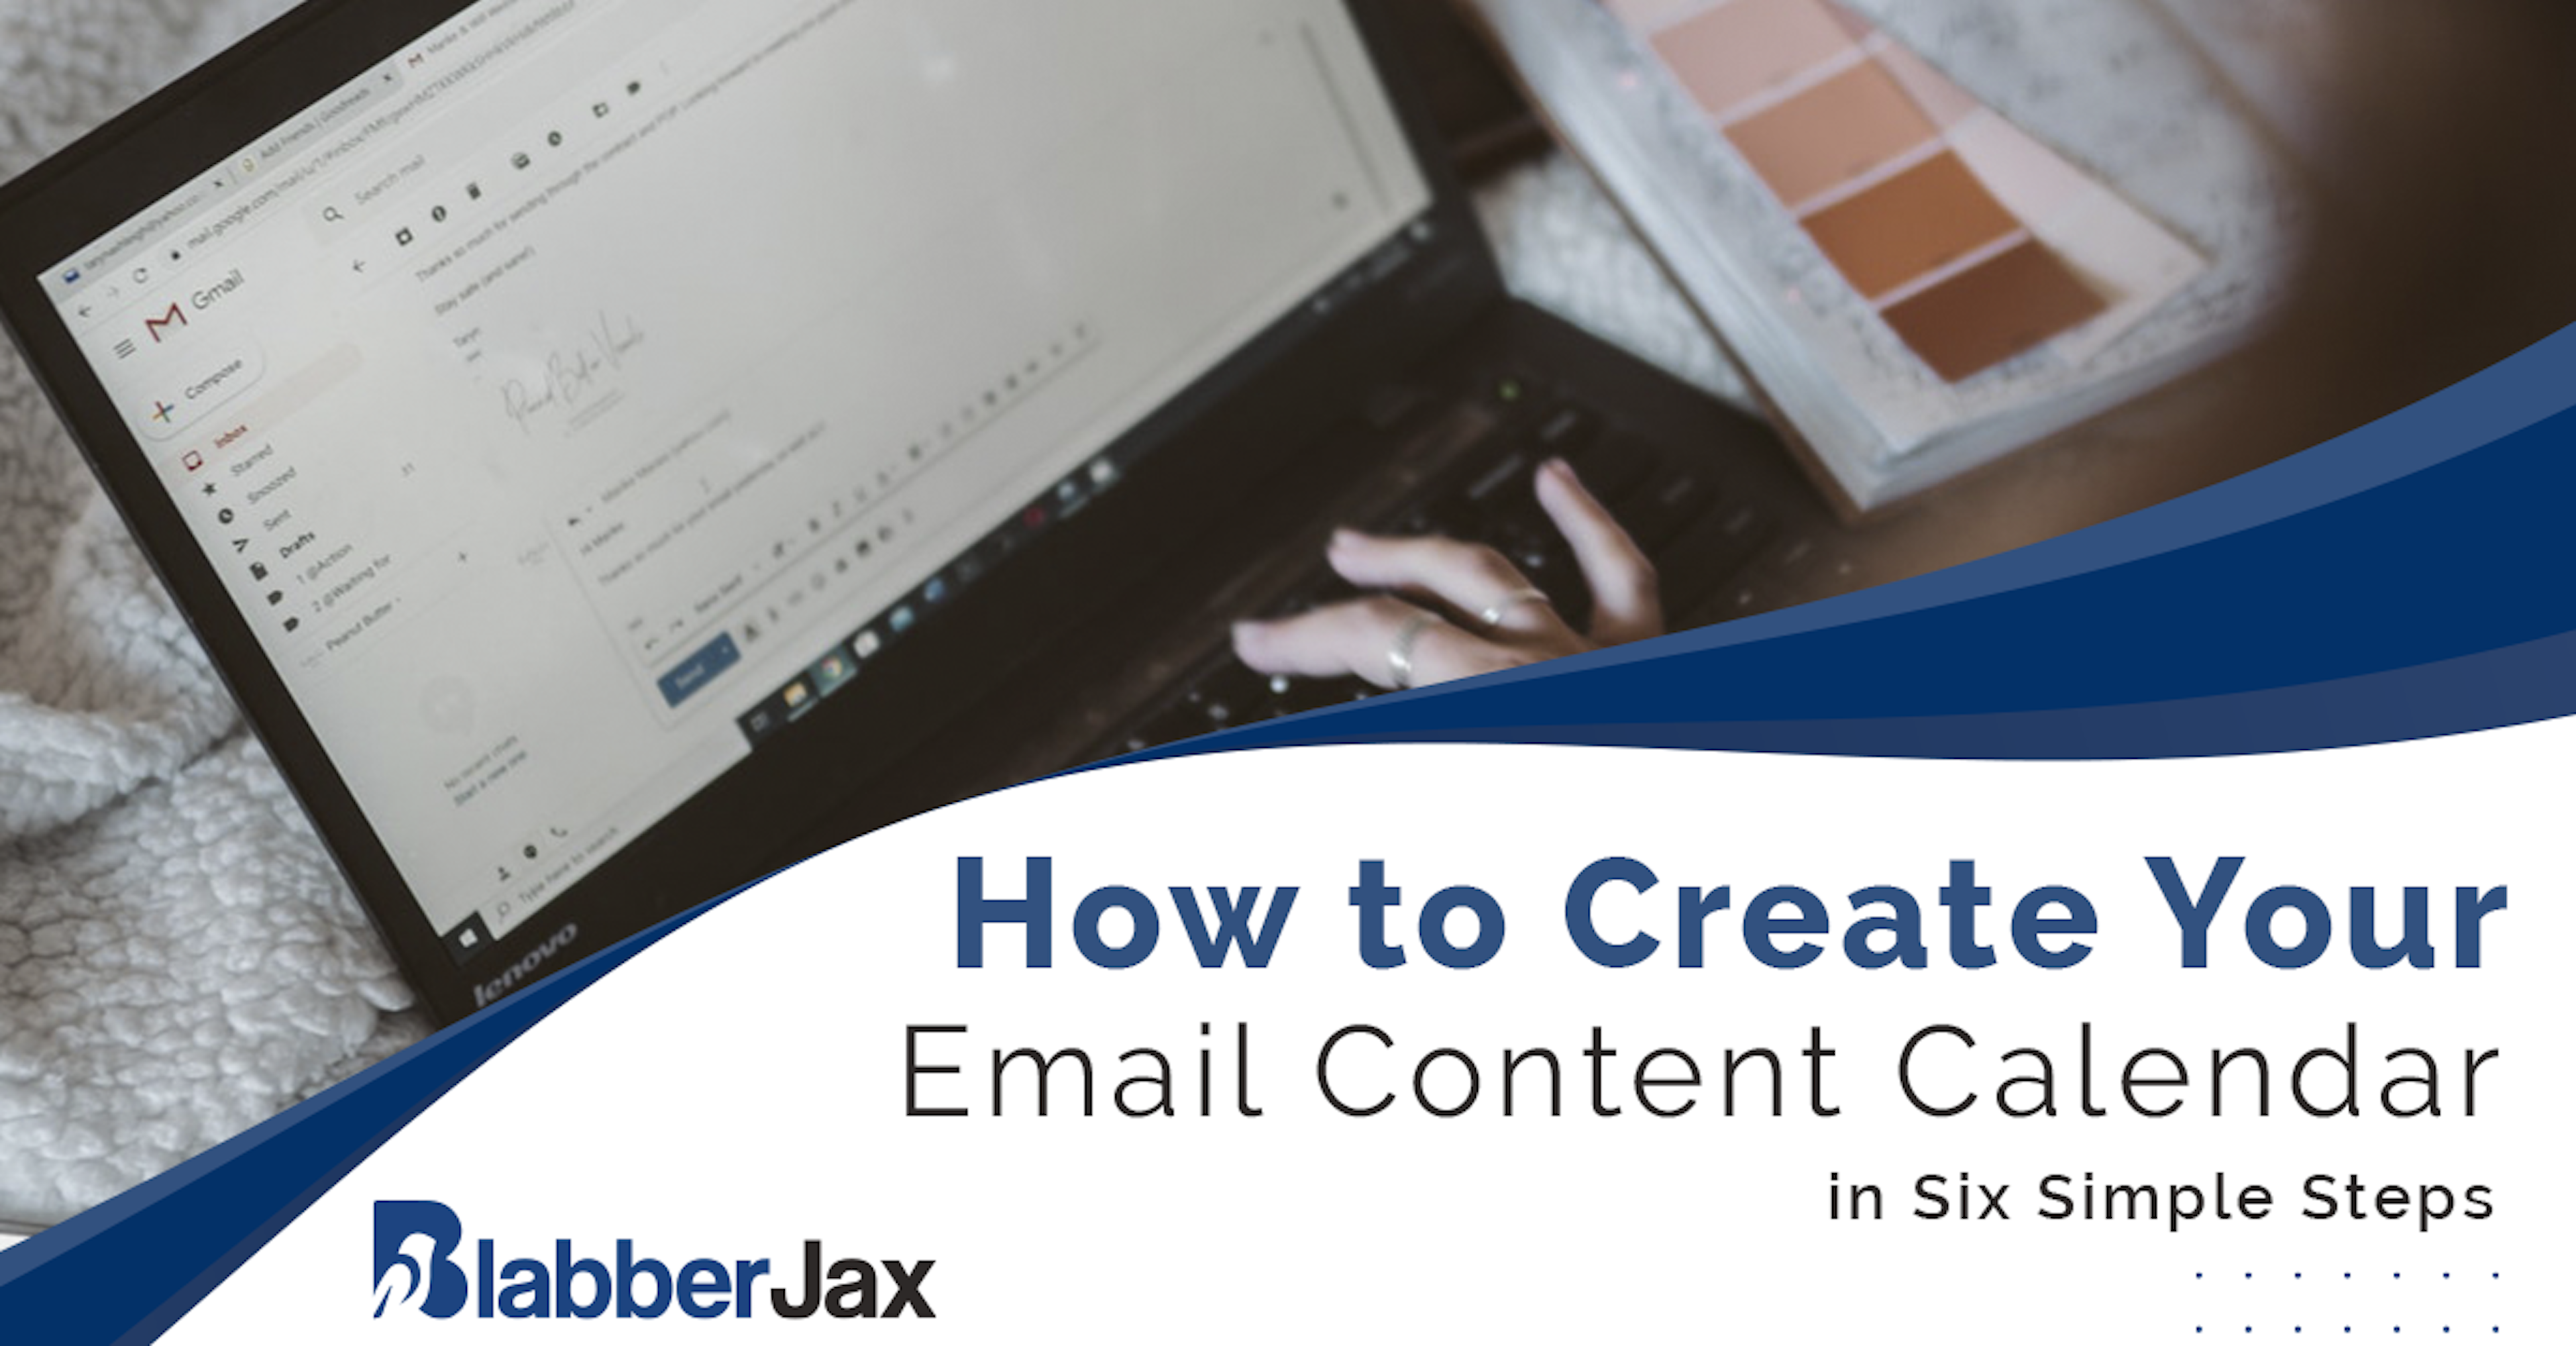 How to Create Your Email Content Calendar in Six Simple Steps